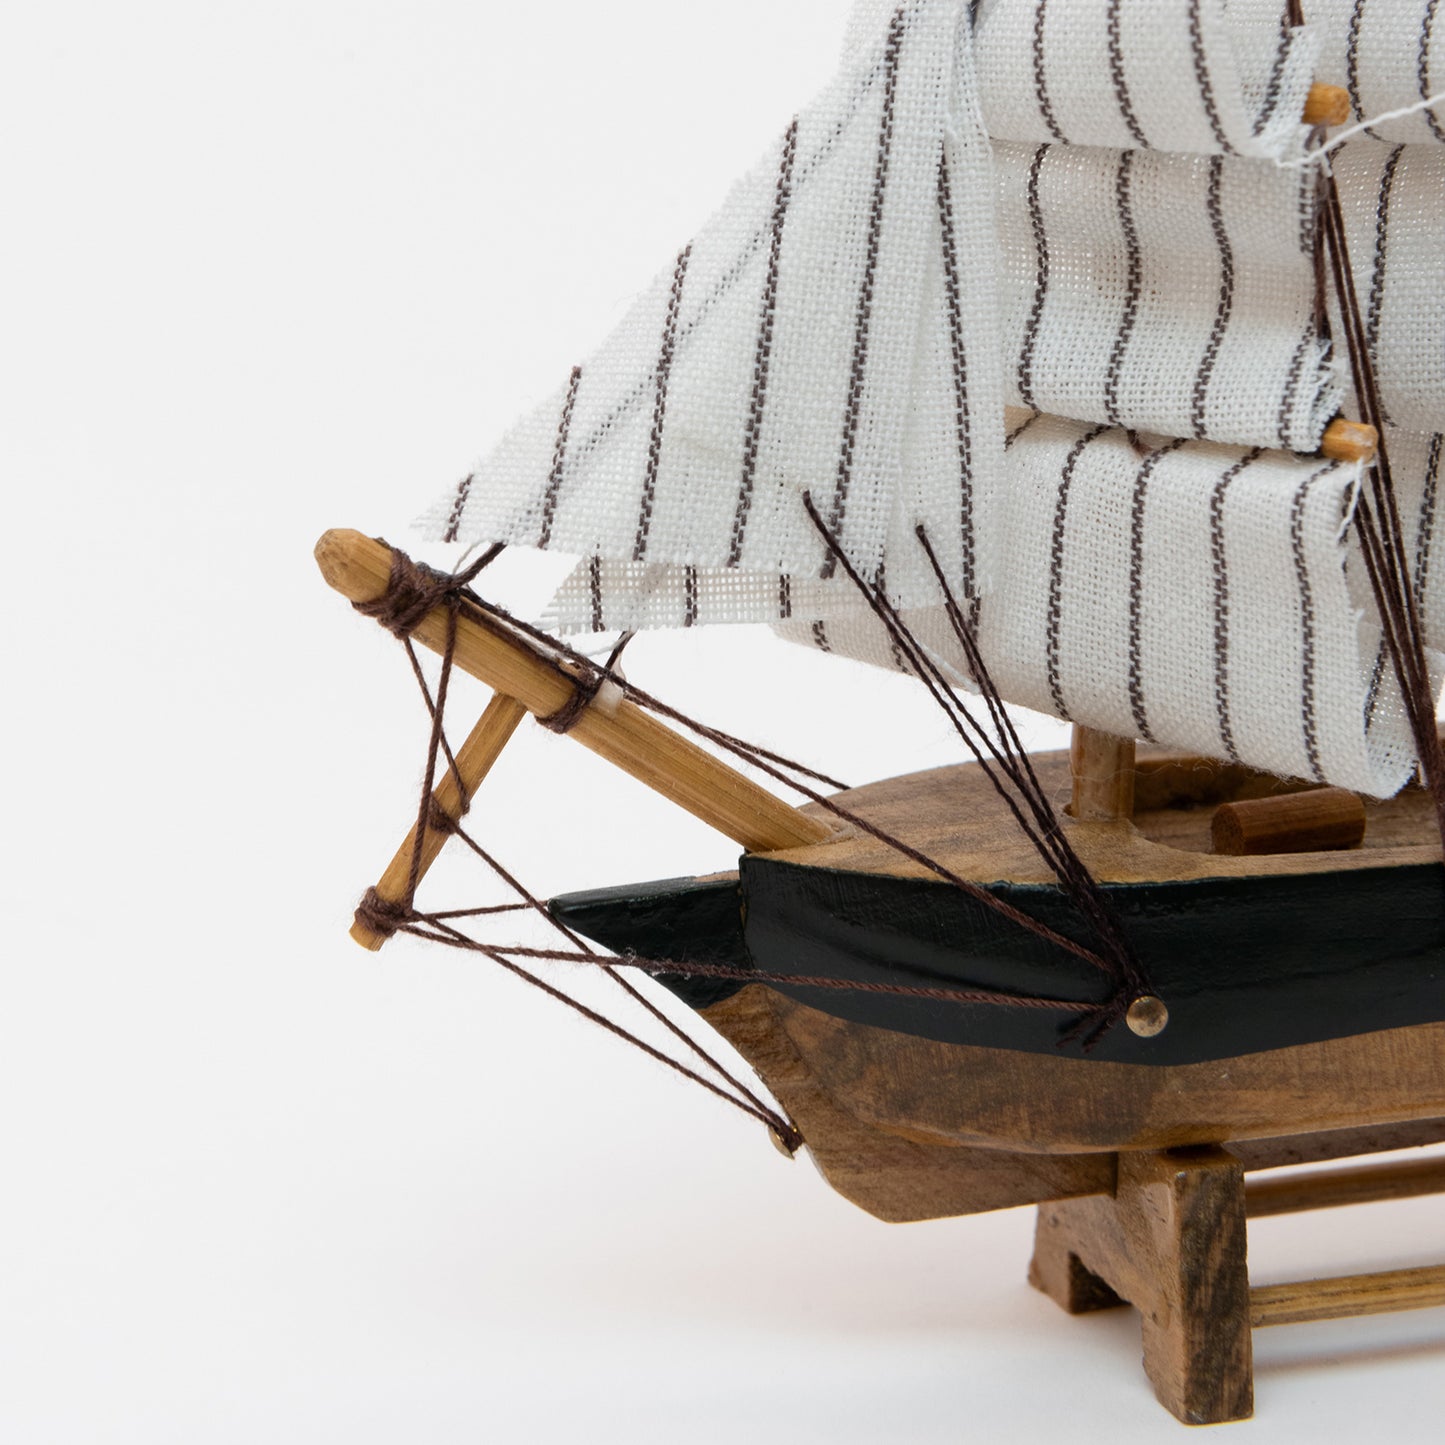 Close-up view of the model clipper's bow with wooden hull and white stripy sails.